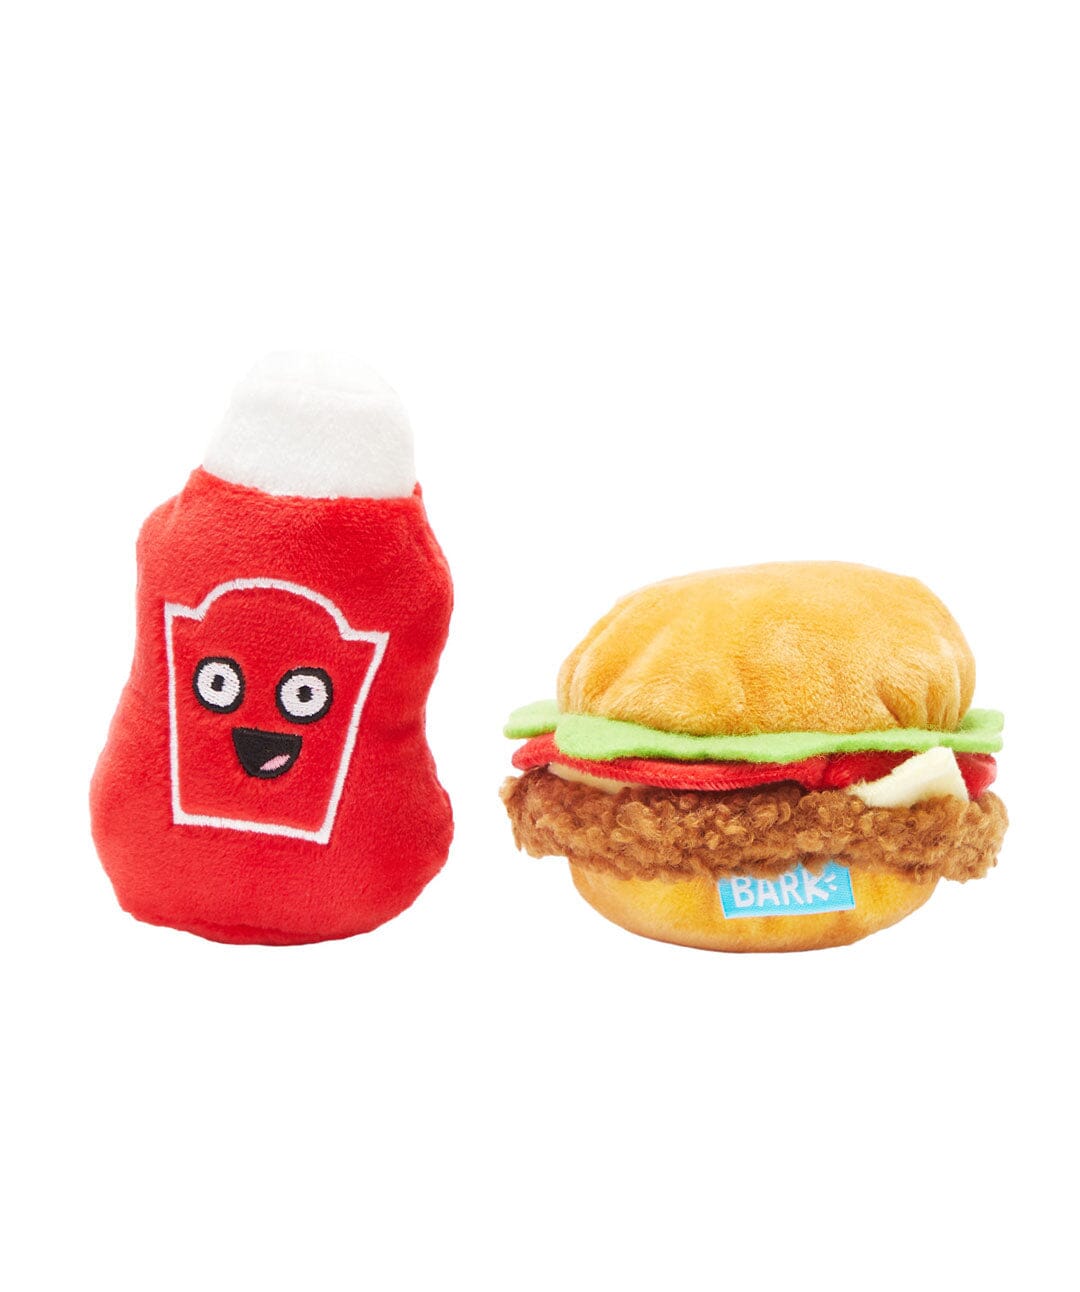 BARK Cookout Burger & Ketchup Dog Toy Rover Store 